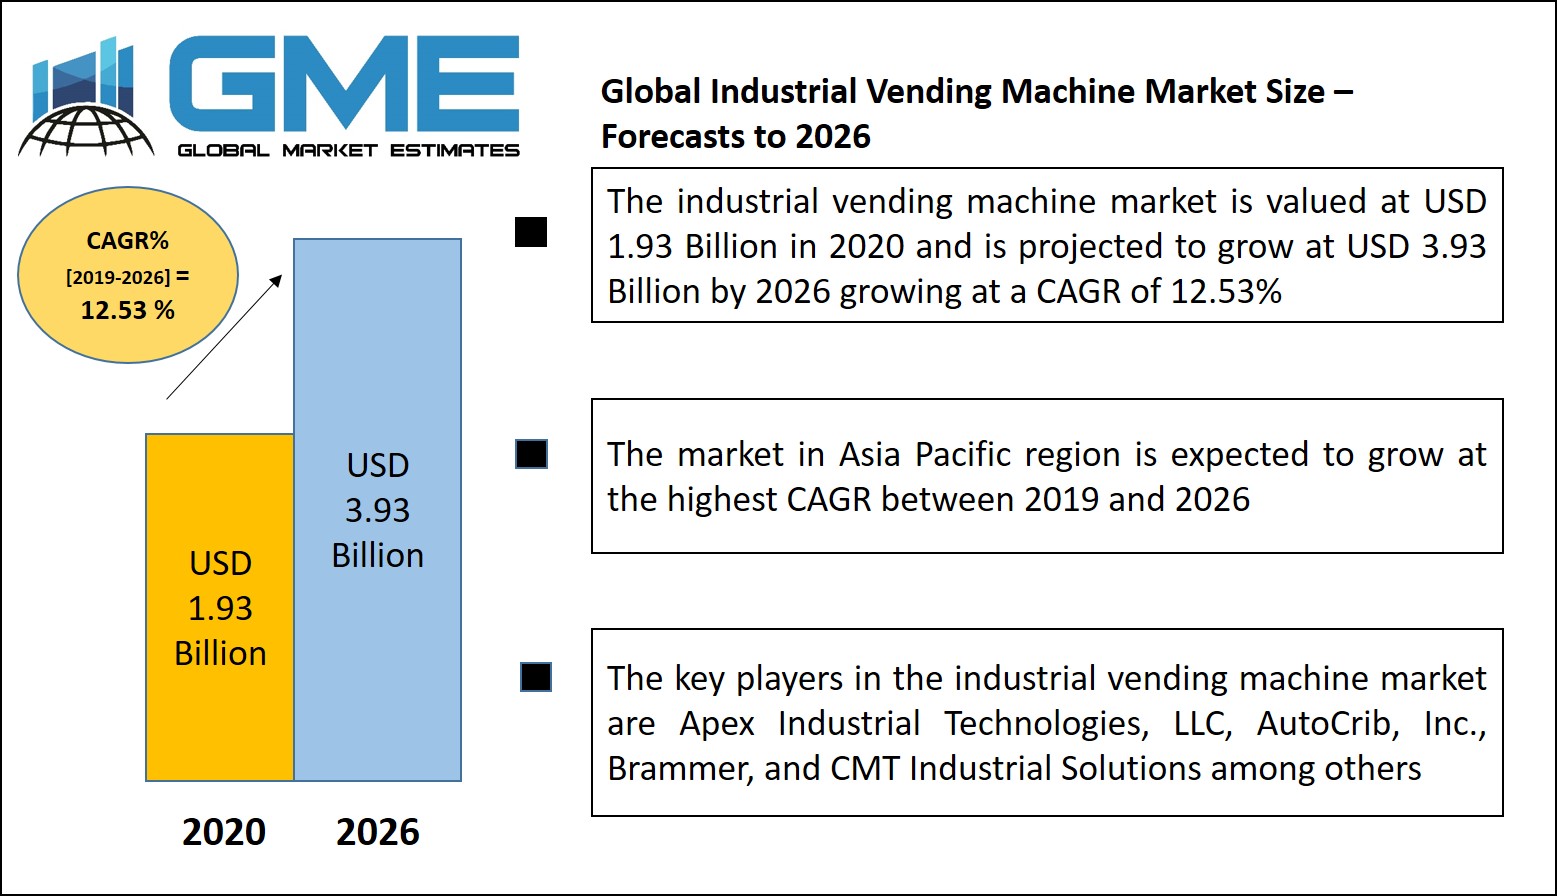 Global Industrial Vending Machine Market Size – Forecasts to 2026